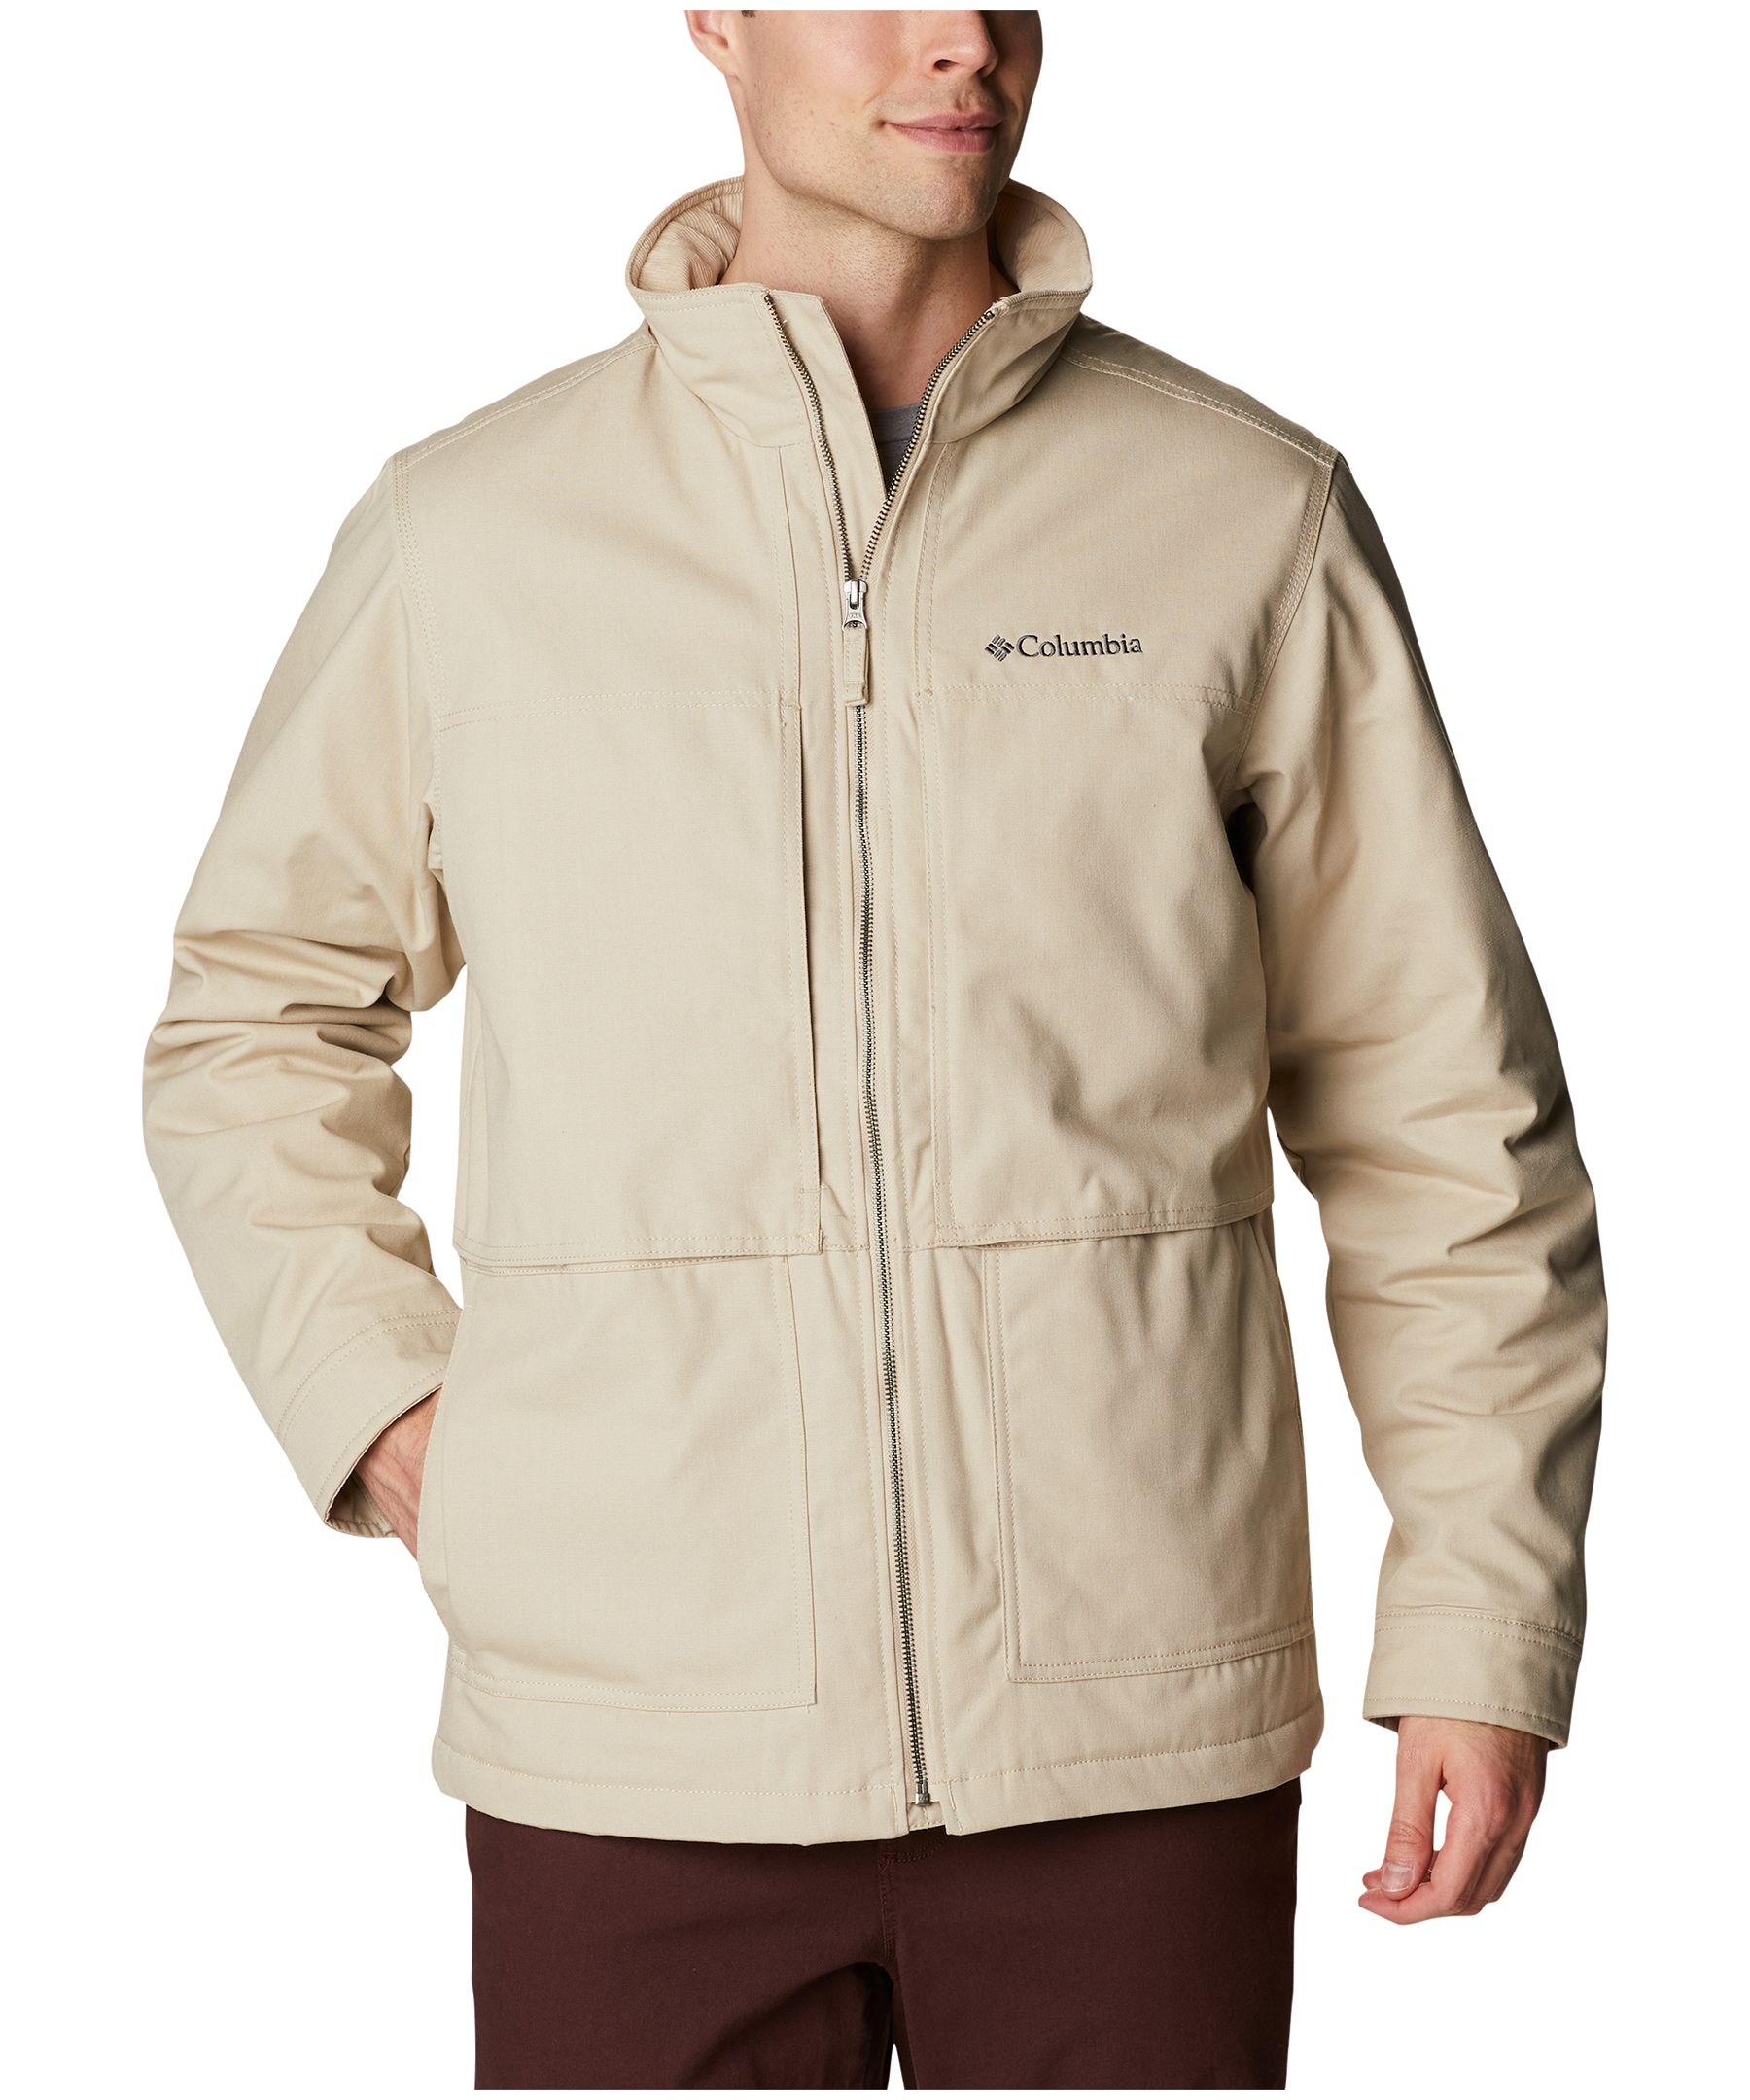 https://media-www.marks.com/product/marks-work-wearhouse/mens-world/mens-outerwear/410034493202/columbia-men-s-loma-vista-ii-water-resistant-soft-fleece-lined-jacket-e02e0f91-3a6c-4257-9ed1-00e41f0e1aed-jpgrendition.jpg?imdensity=1&imwidth=1244&impolicy=mZoom